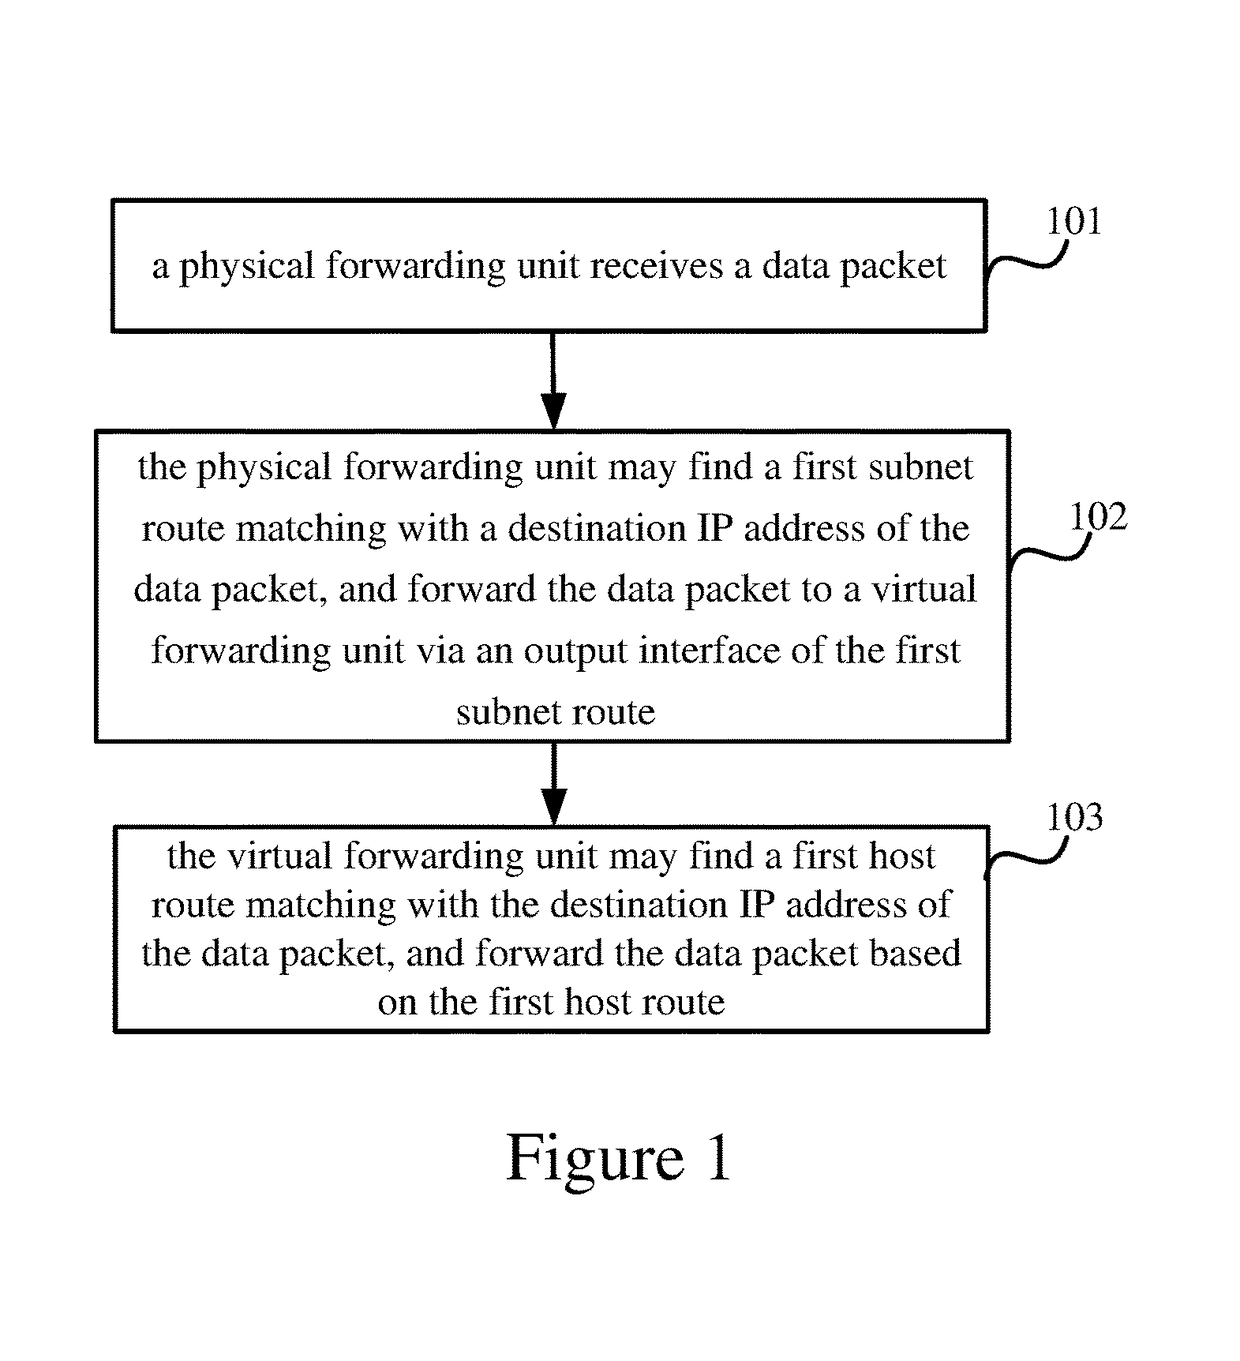 Packet forwarding using a physical unit and a virtual forwarding unit